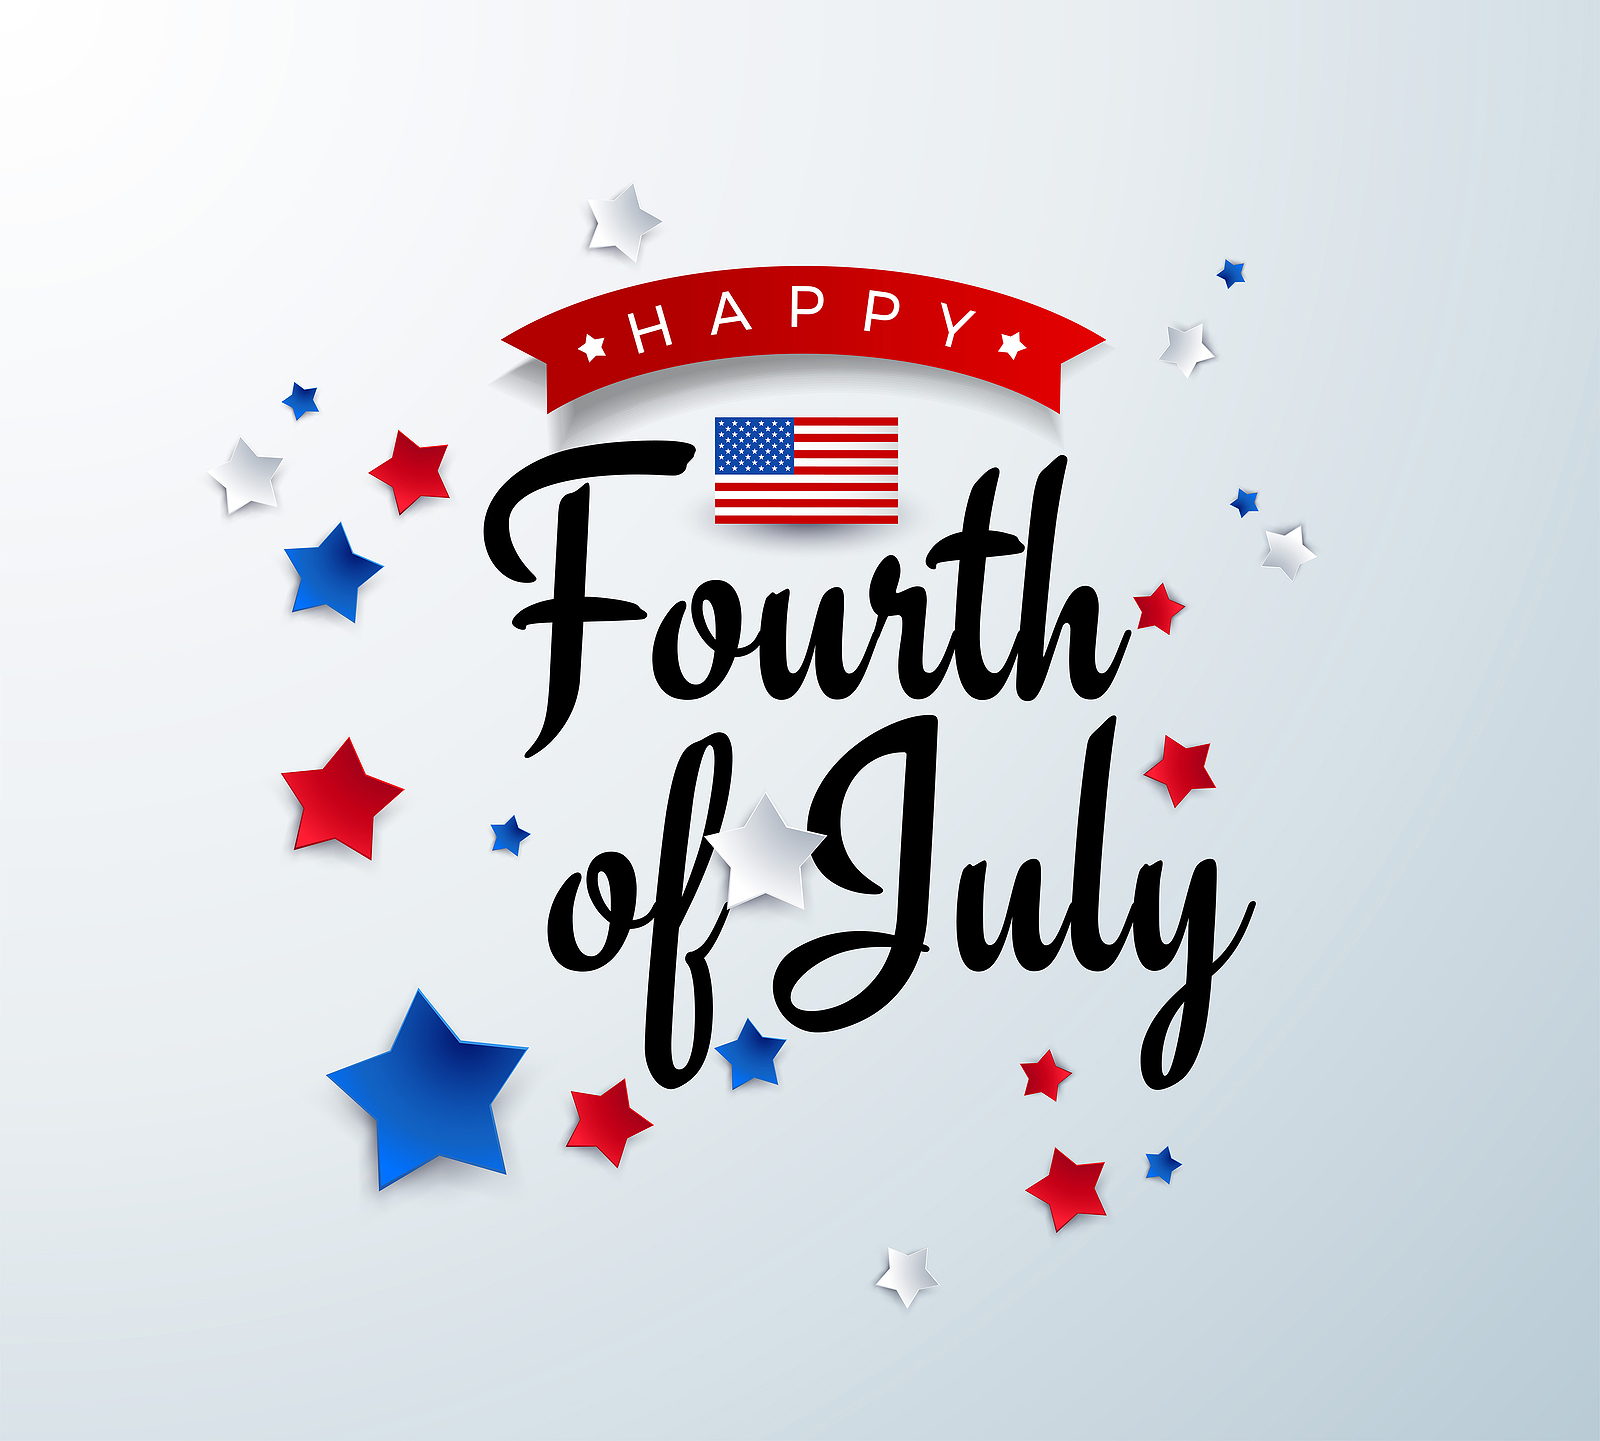 HAPPY FOURTH OF JULY!! Companion Services of America